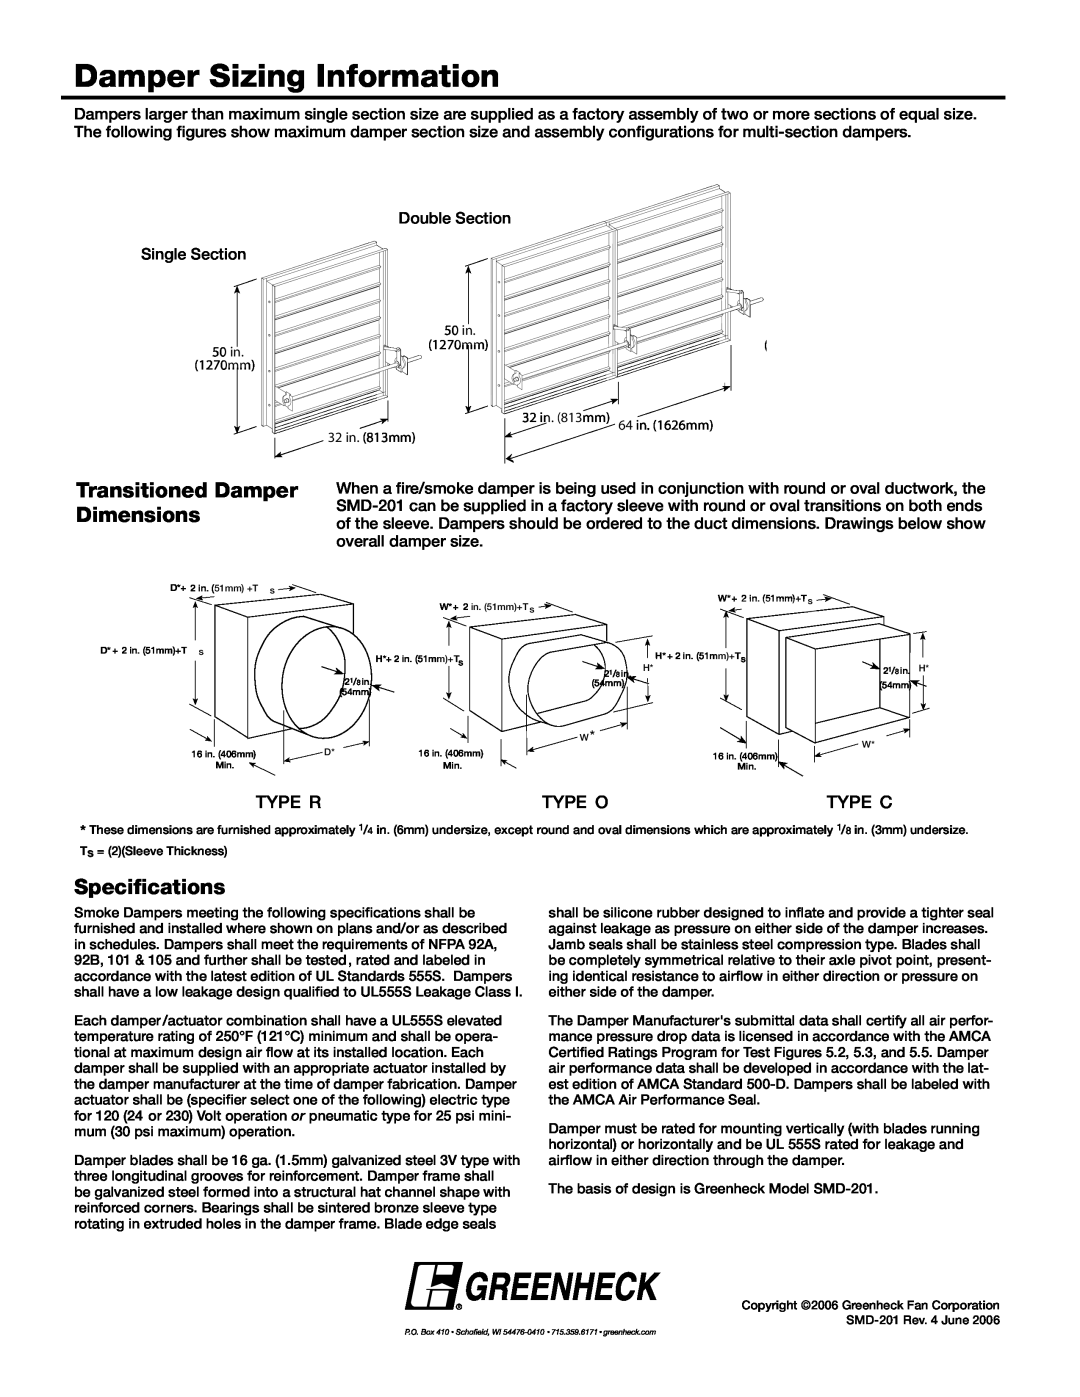 Greenheck Fan SMD-201 dimensions Damper Sizing Information, Transitioned Damper Dimensions, Specifications 